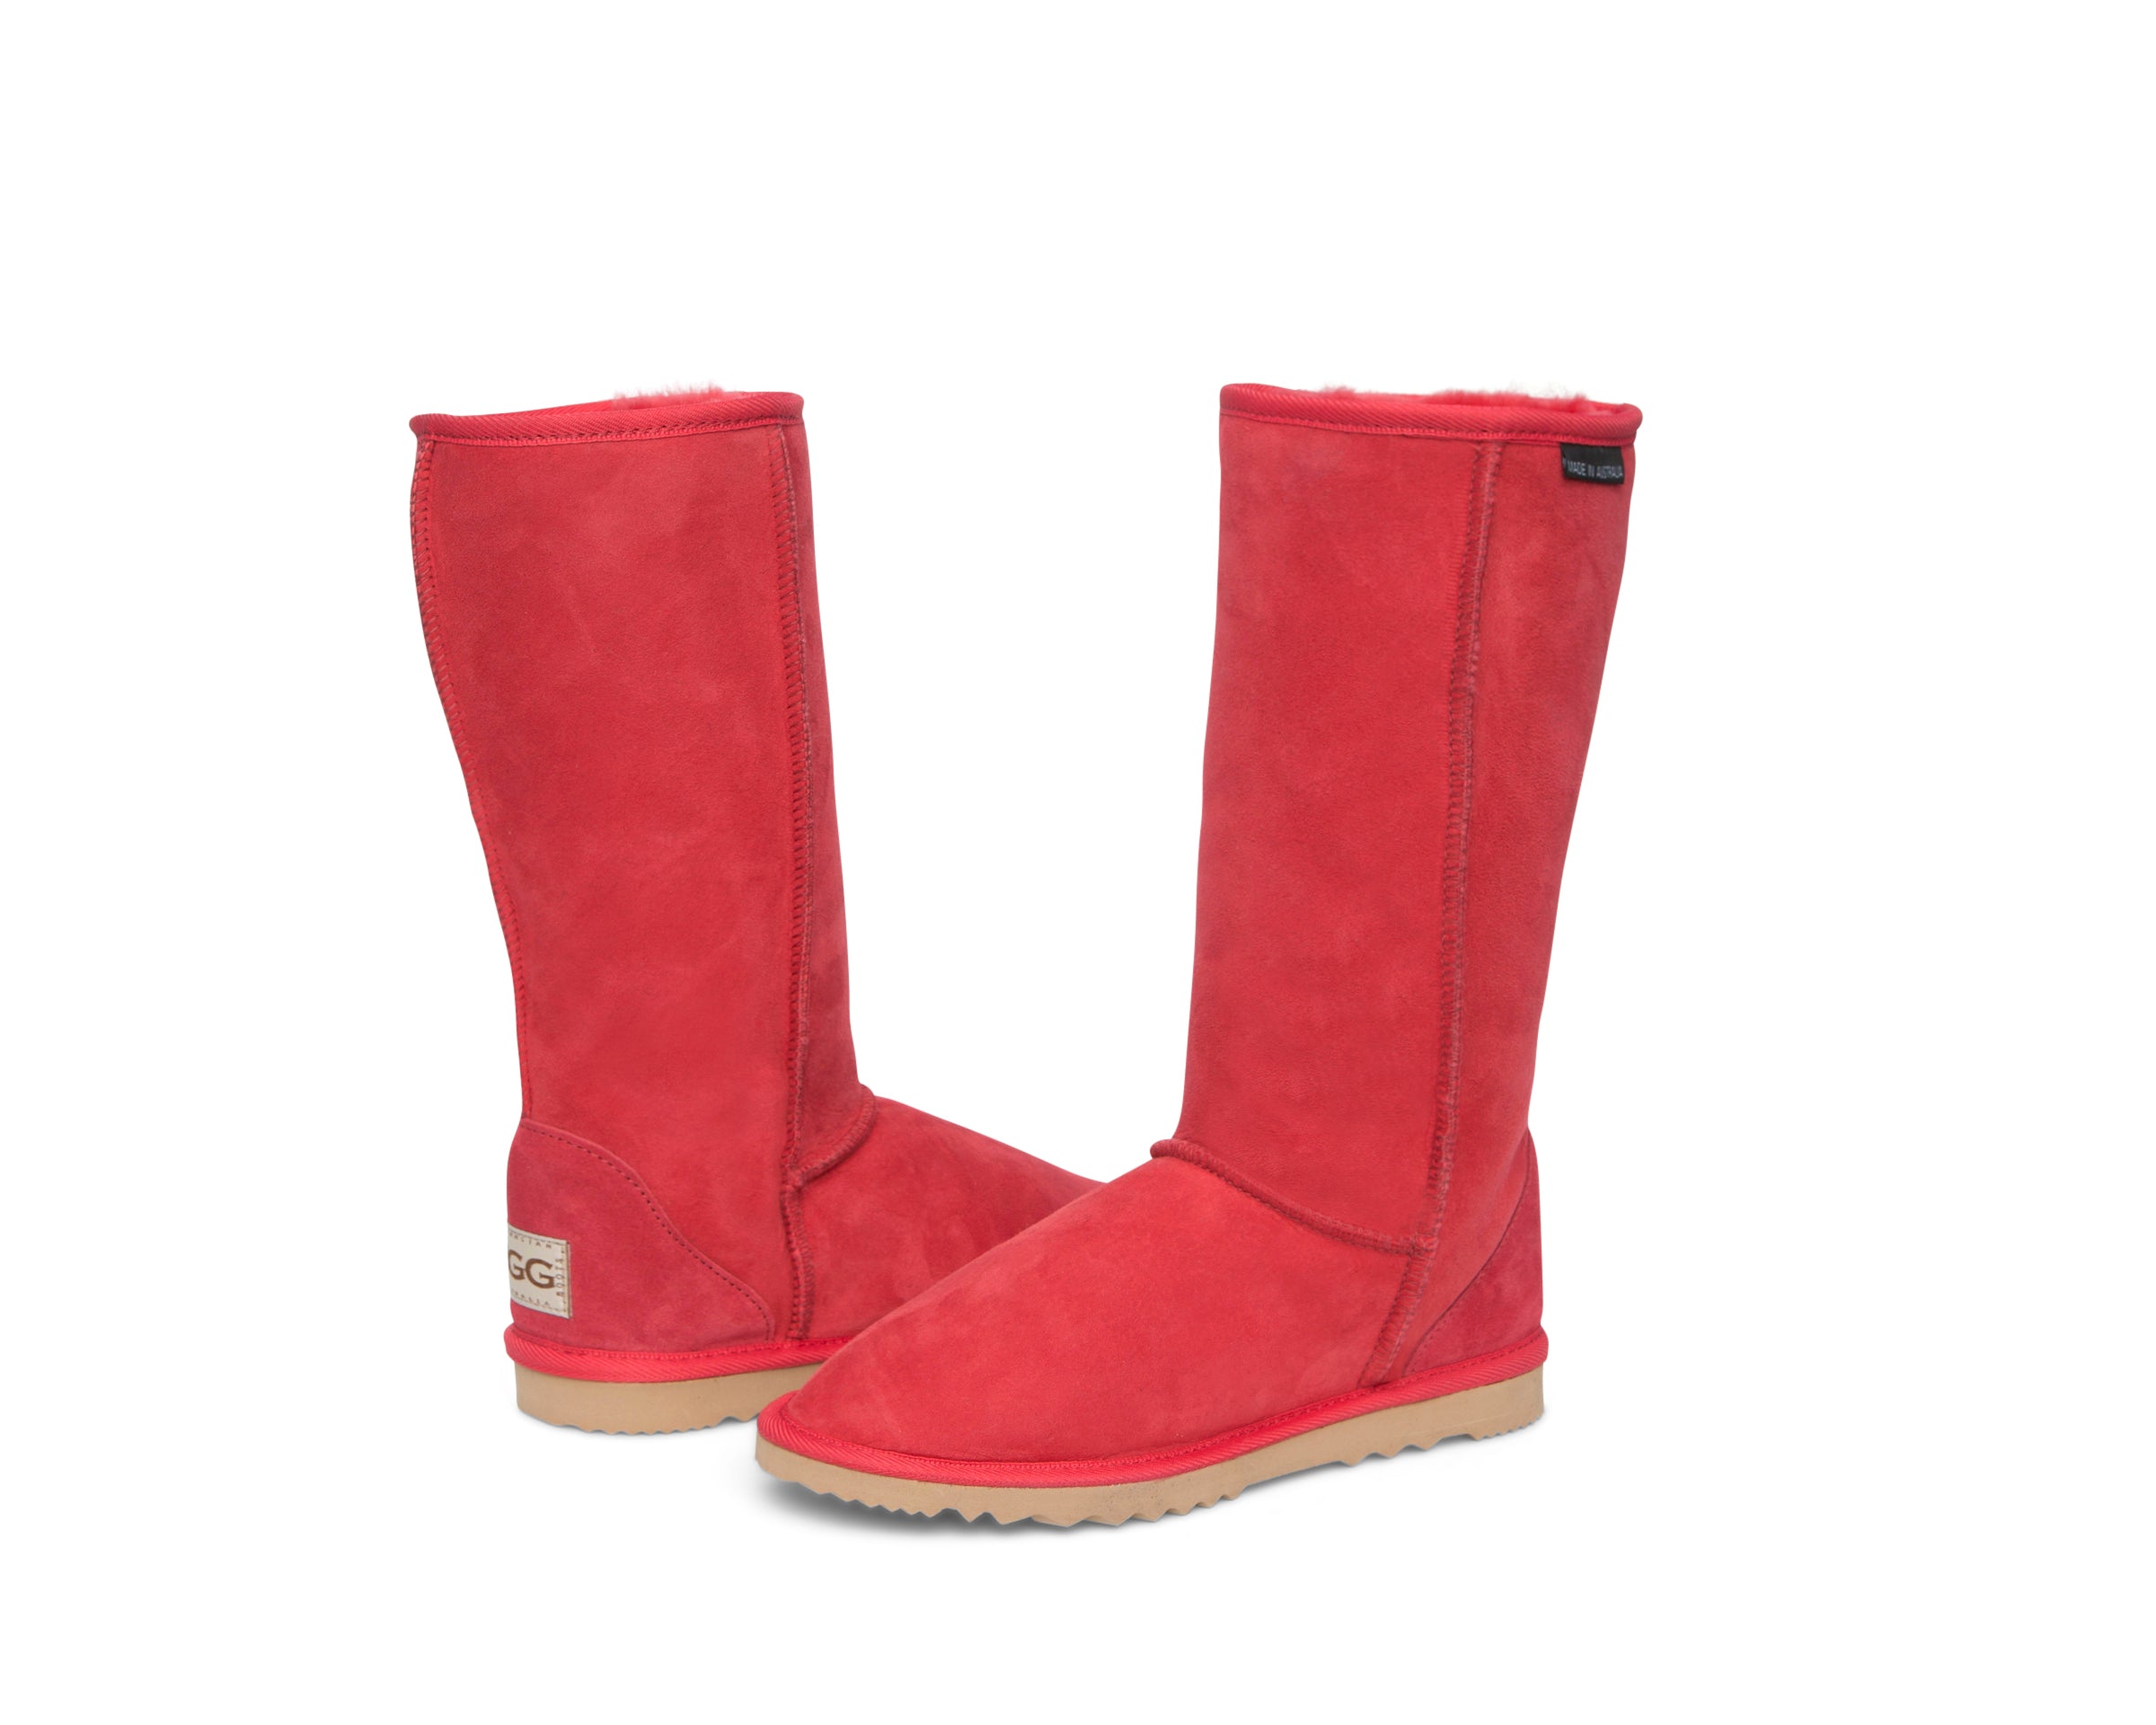 WOMEN'S CARNIVAL TALL BOOTS